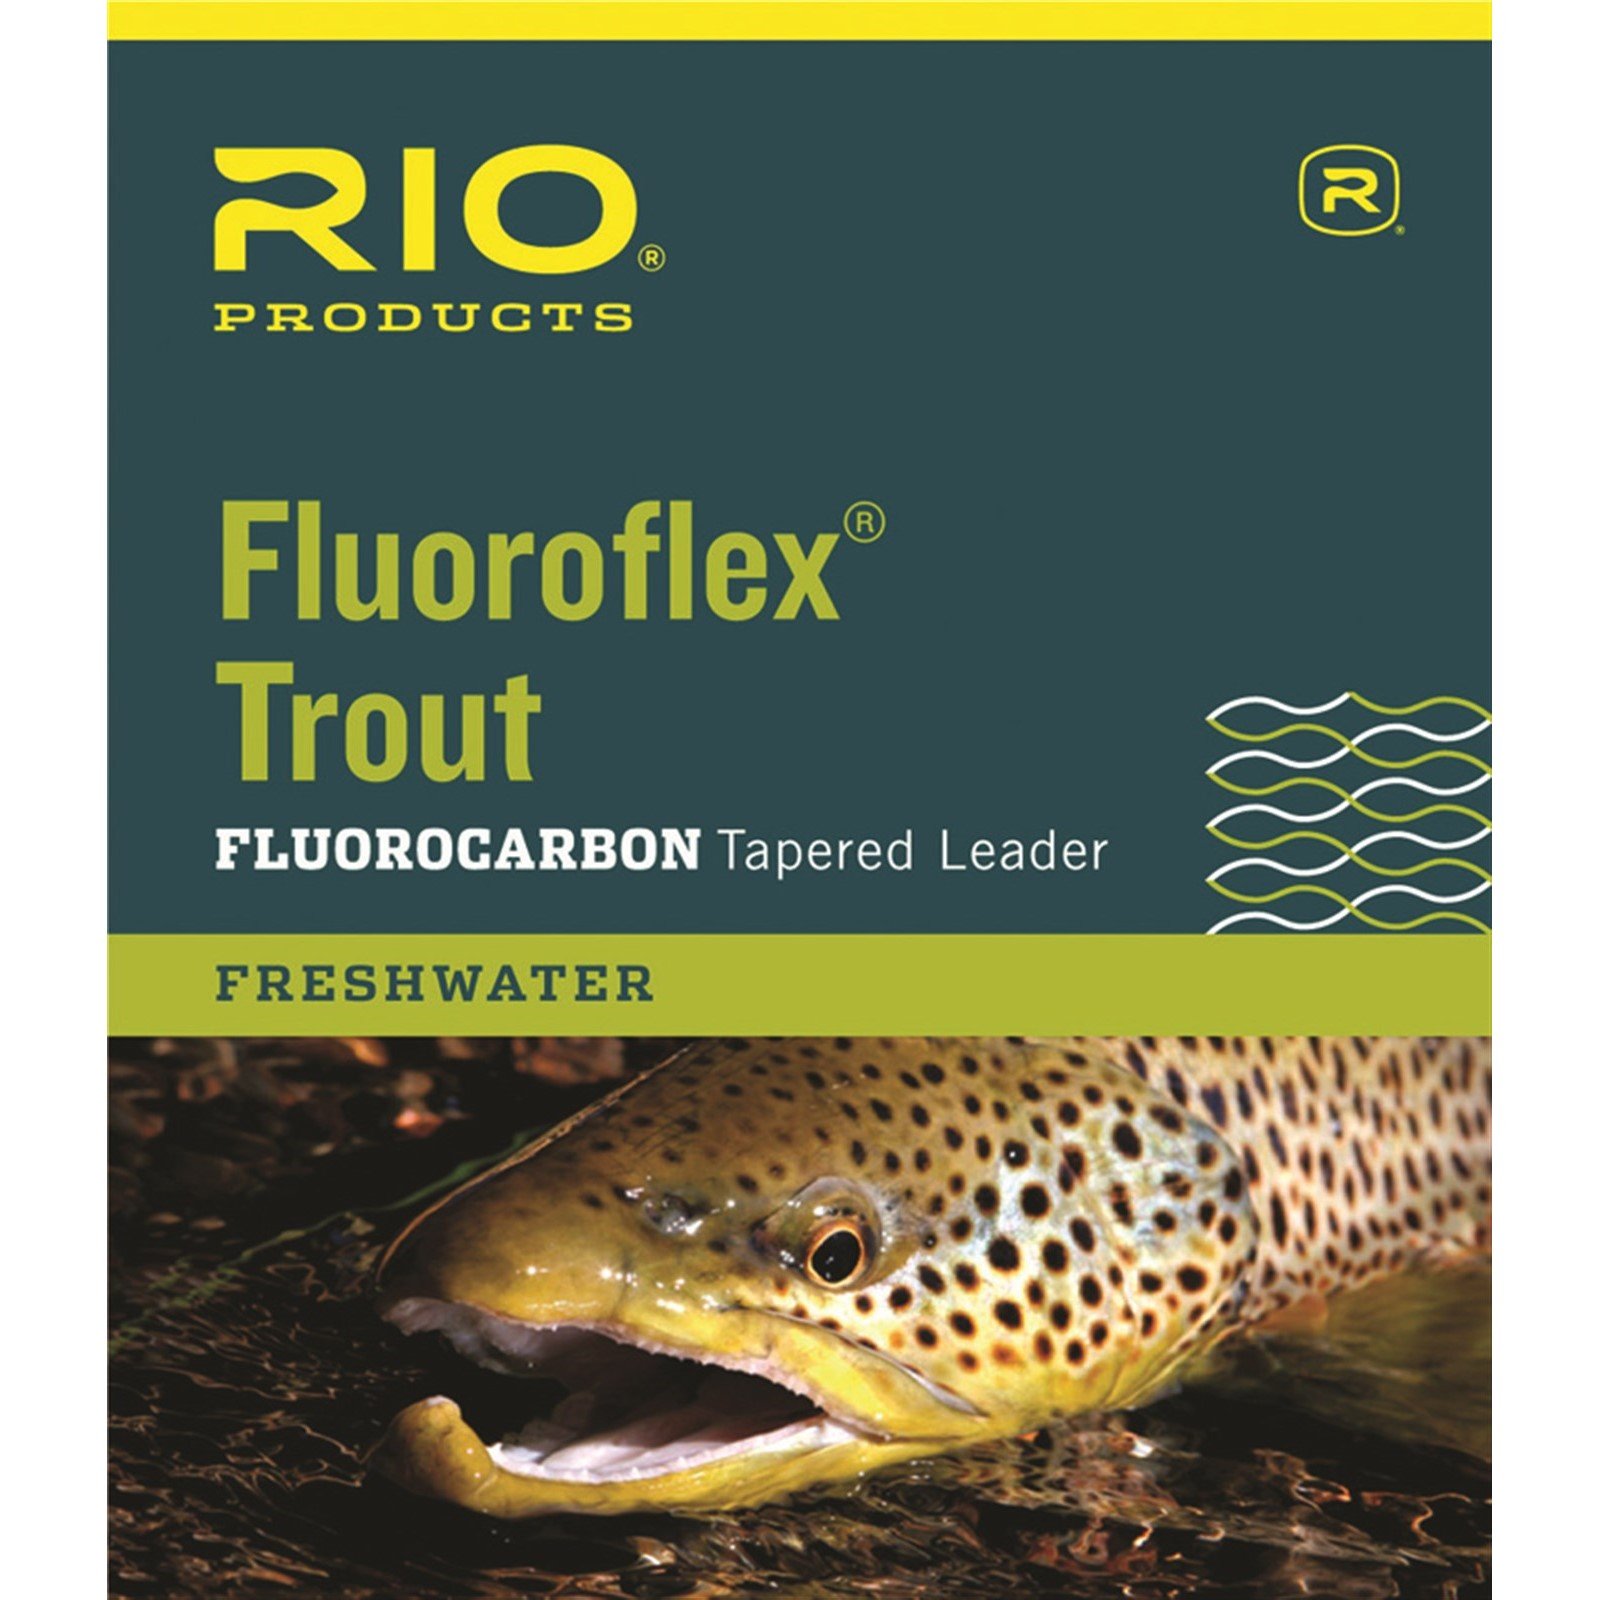 Umpqua Fly Fishing Trout Tapered (6 Pack) 9' Leader - Fly Fishing